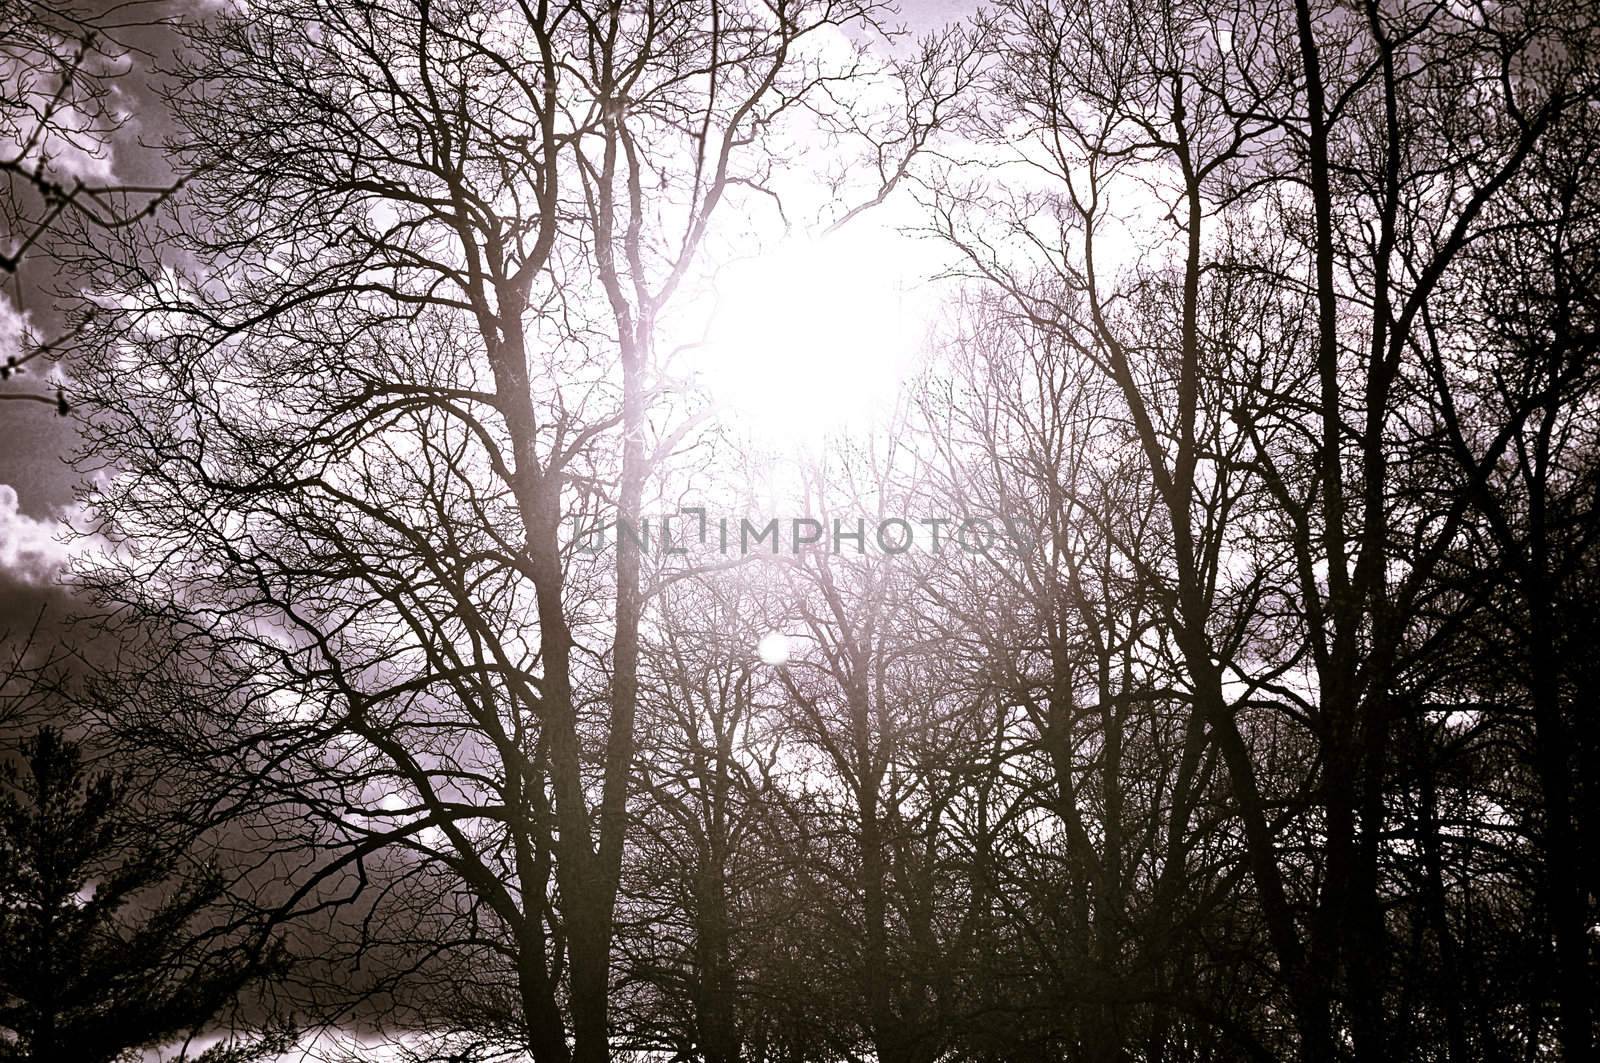 Sun Bursts Through The Trees by RefocusPhoto